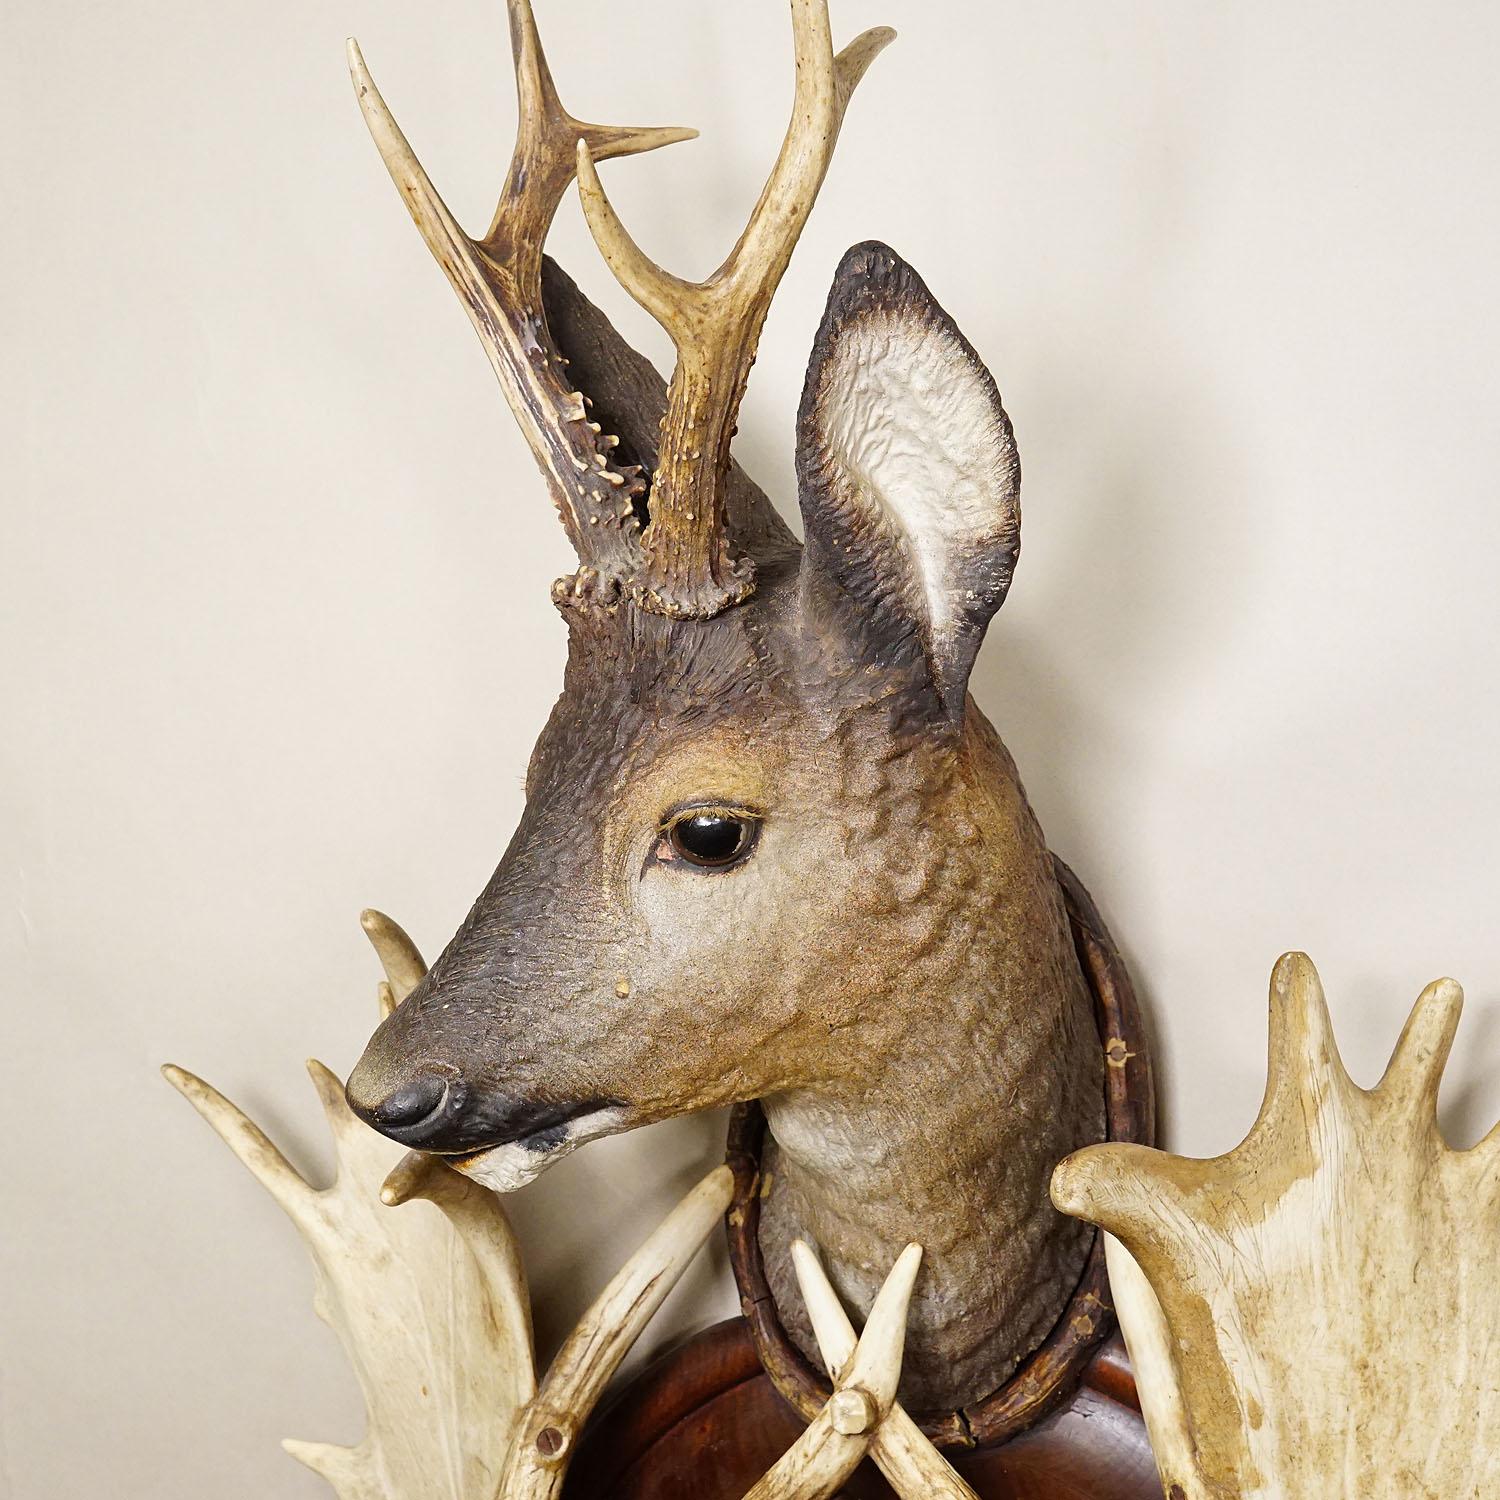 Antique Cabin Antler Wall Clock with Deer Head Austria ca. 1900 For Sale 3